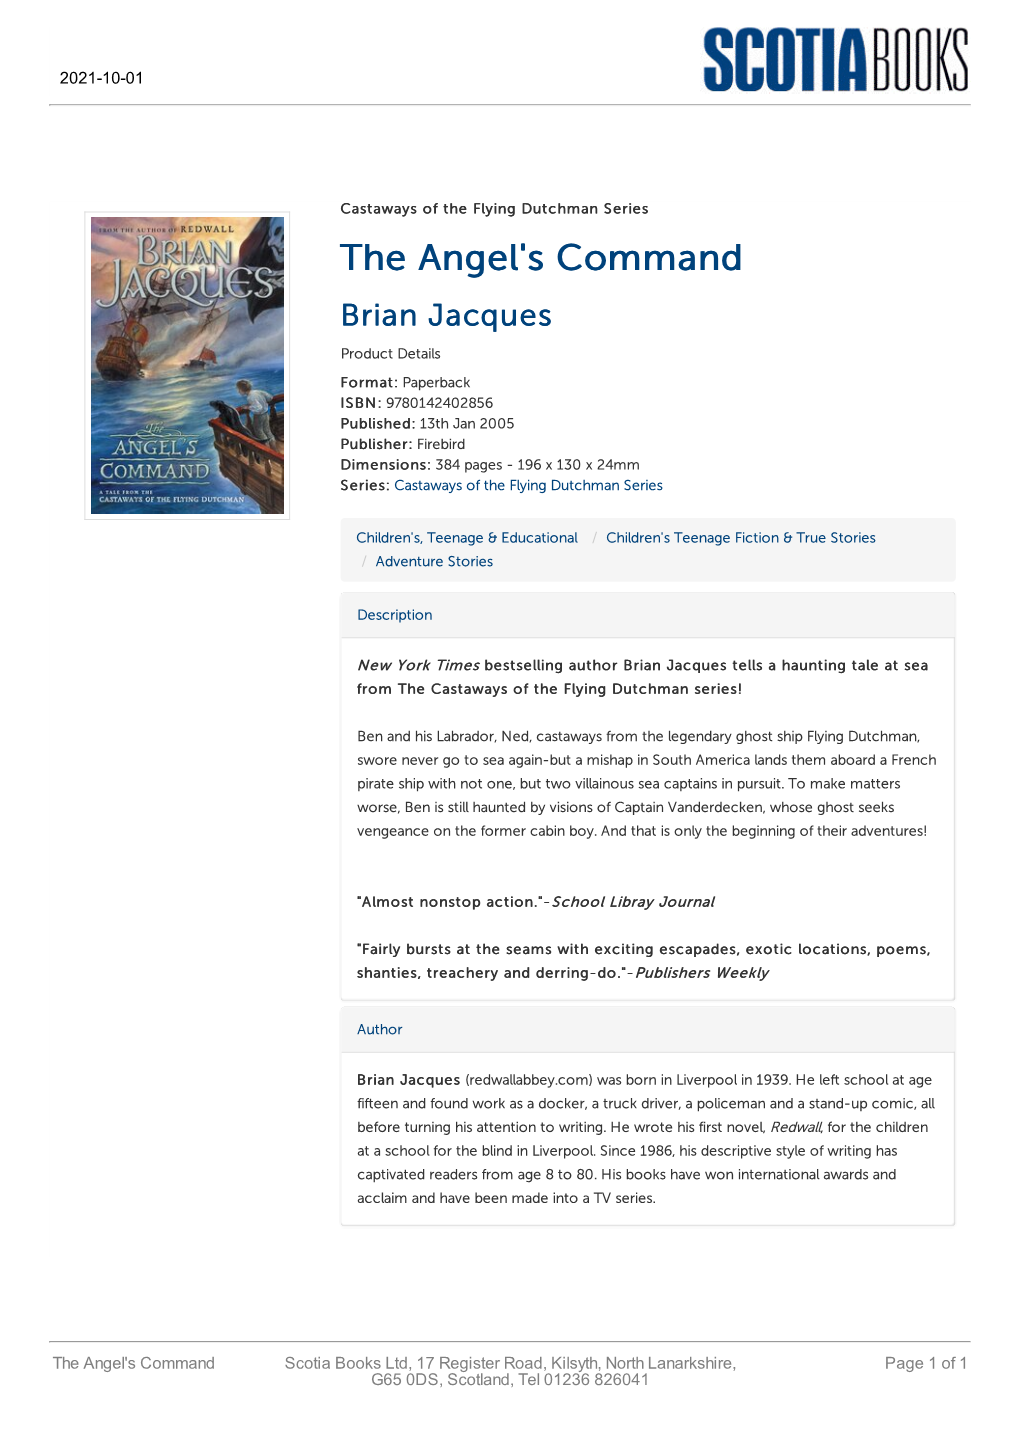 The Angel's Command